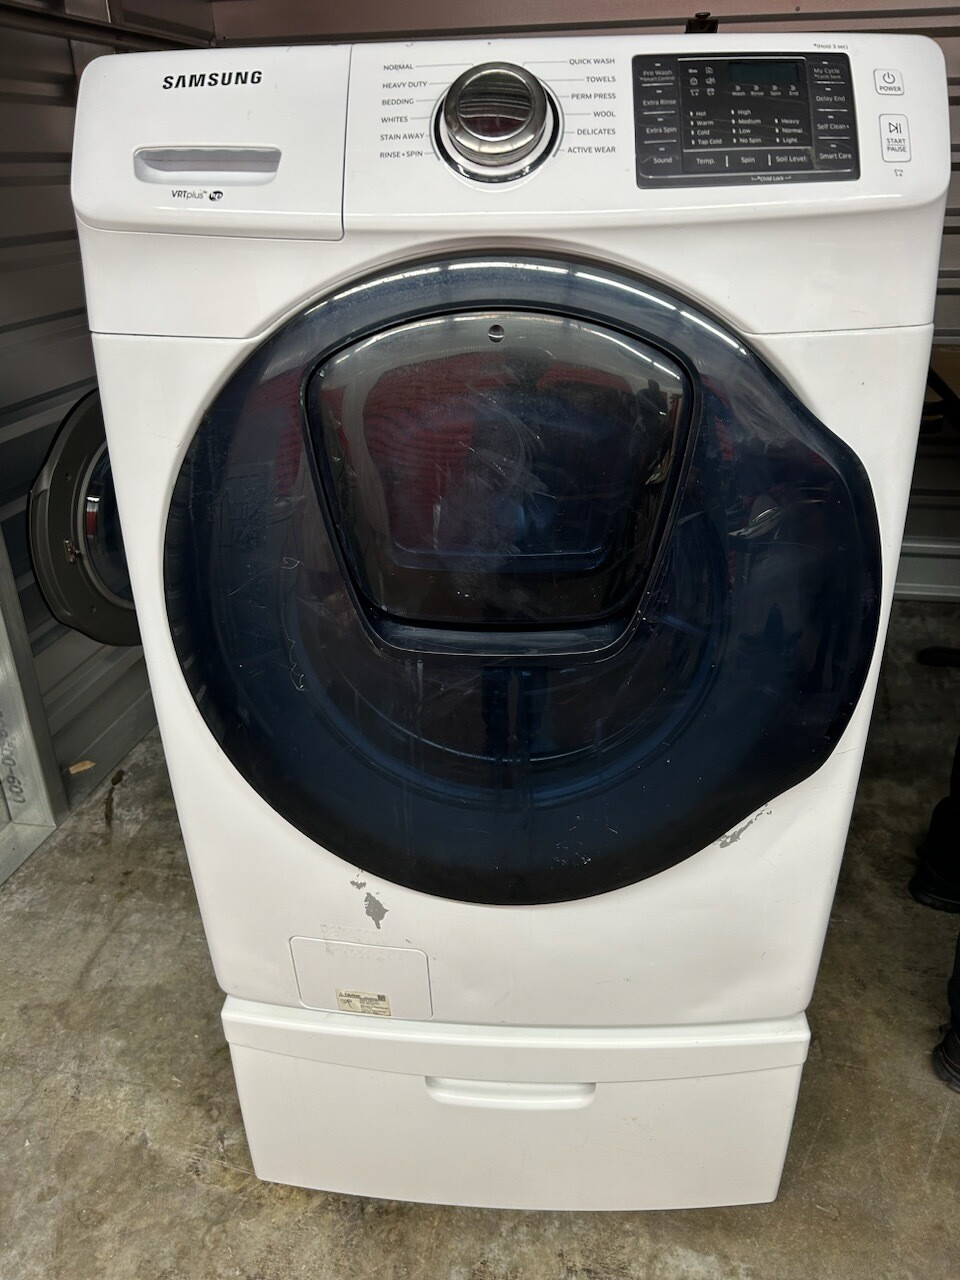 Samsung Front-load Washer w/pedestal base #1148 - TOOK 2.5 MOS, listed at $175, reduced to $125, sold in 1 wk